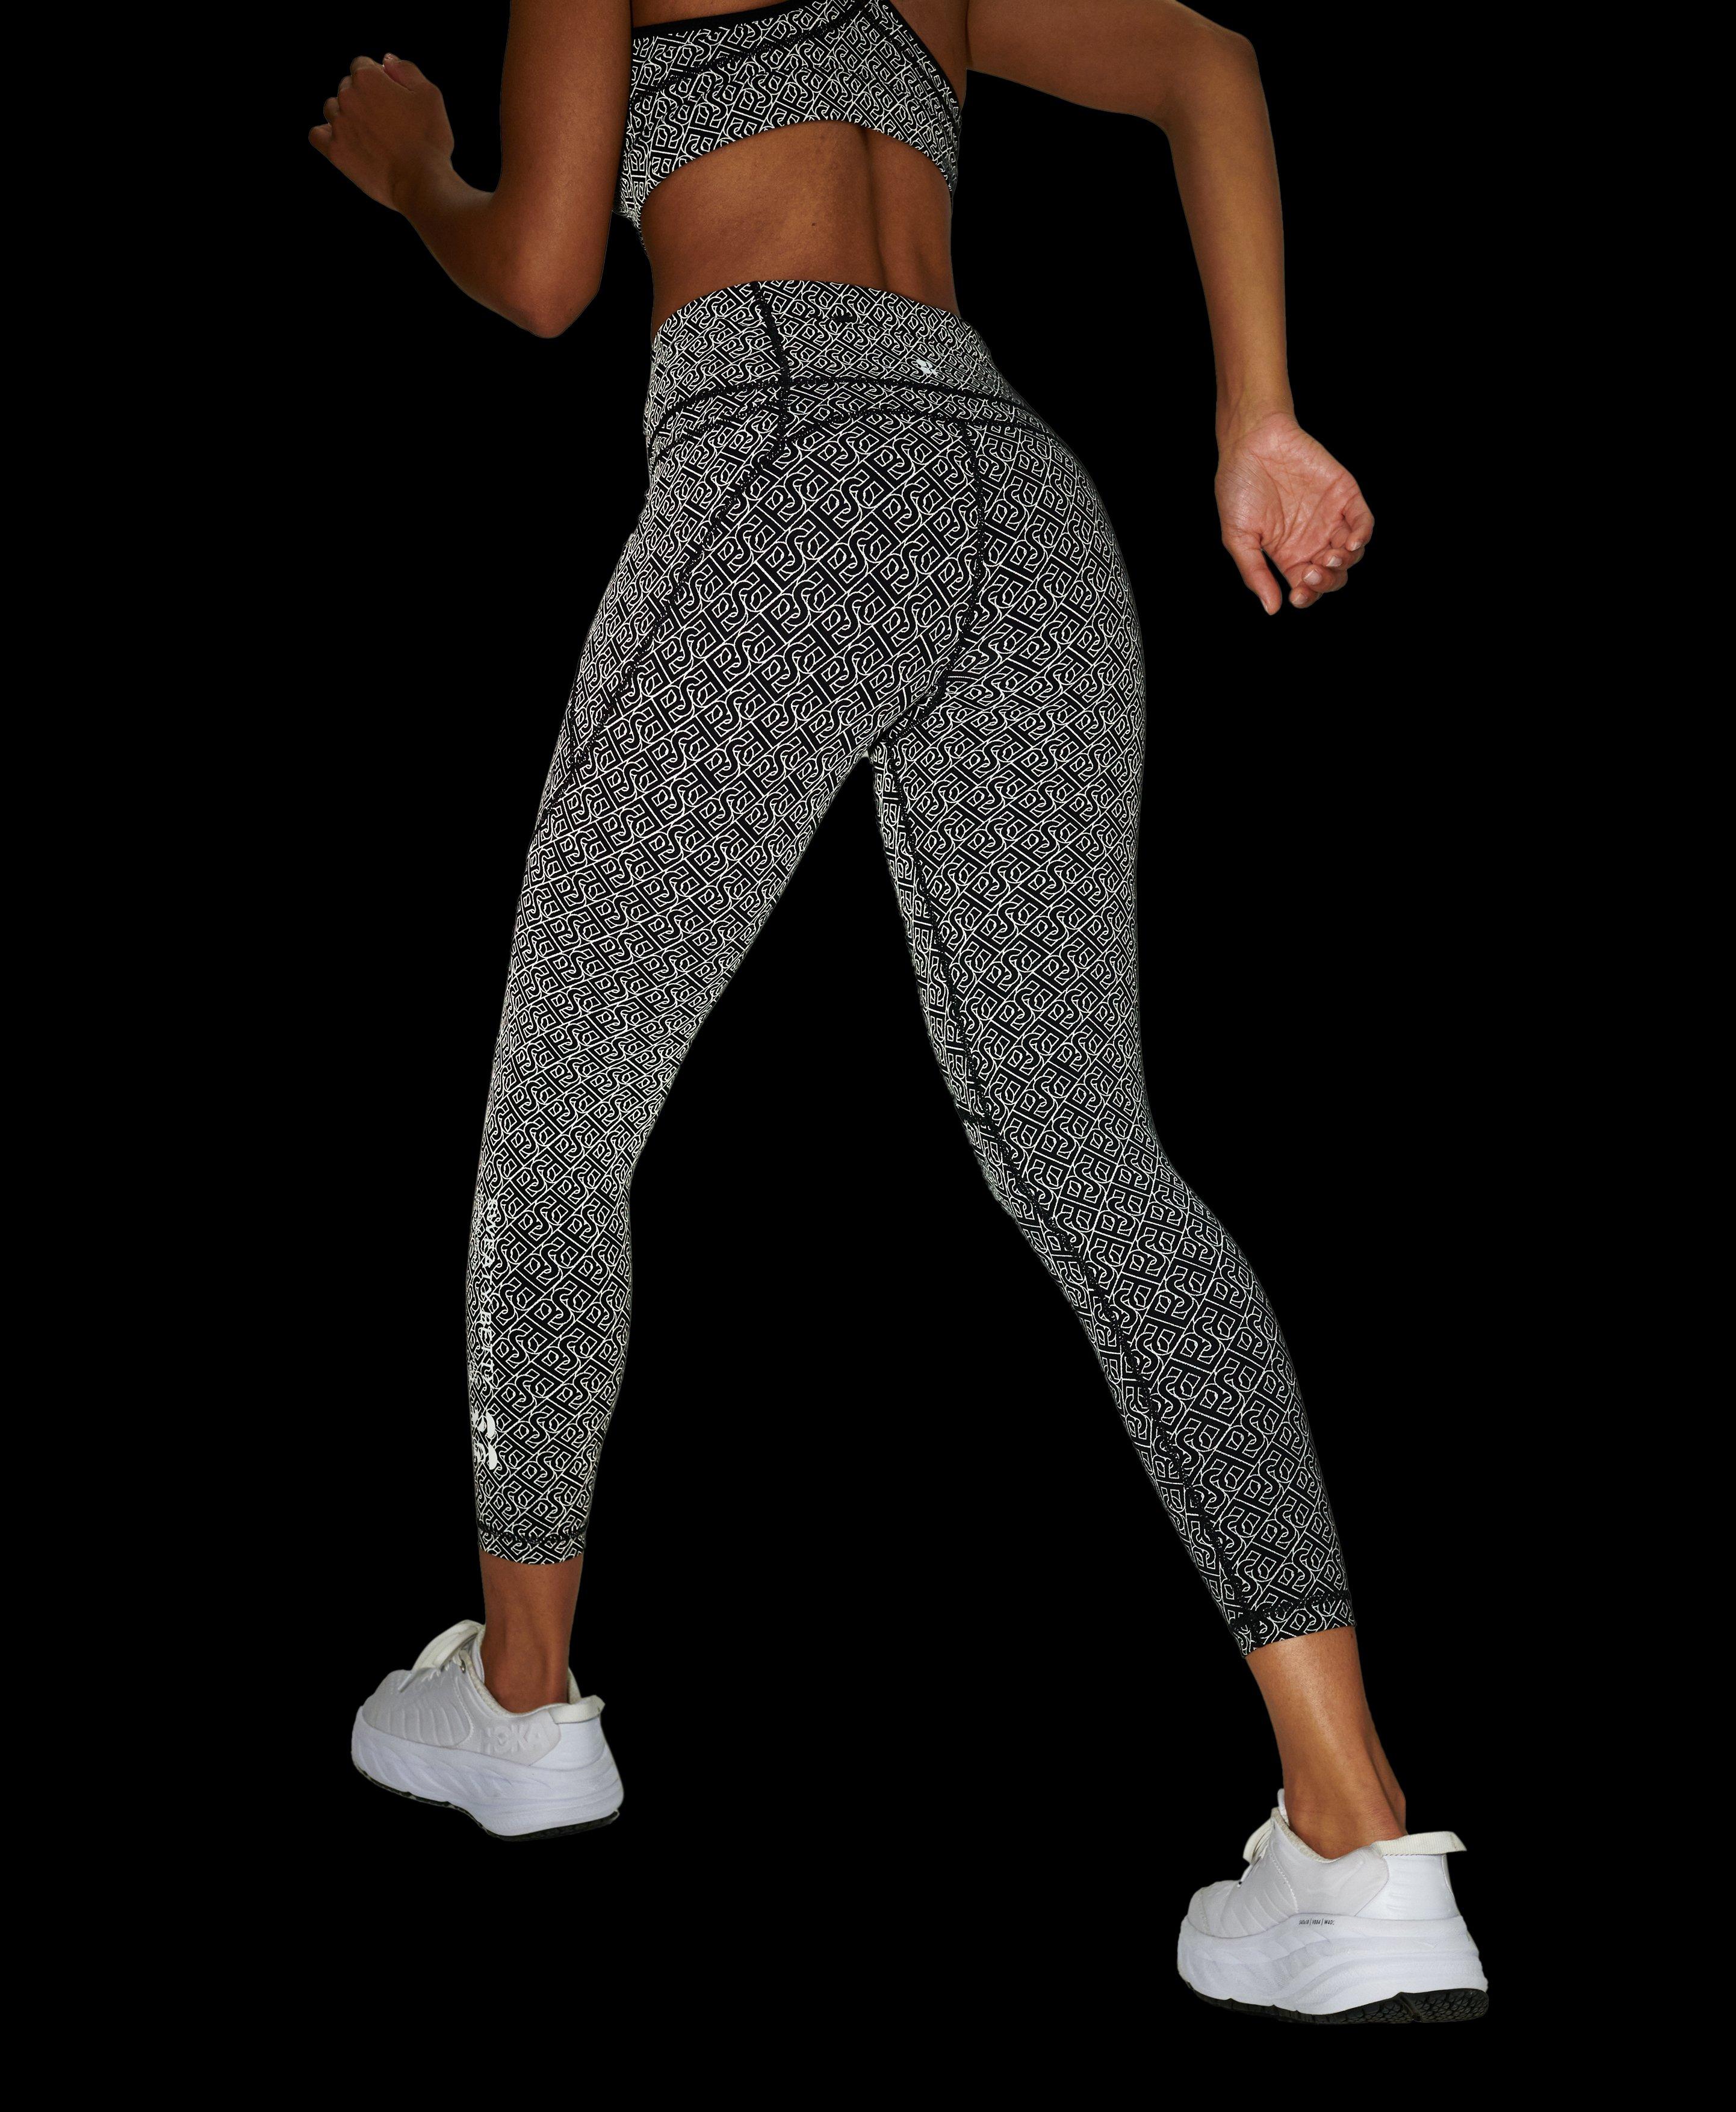 Sweaty Betty - Are you an AM or PM runner? Stay safe and seen with our Jinx  Power Workout Legging – now updated in a reflective print for dark mornings  or evenings